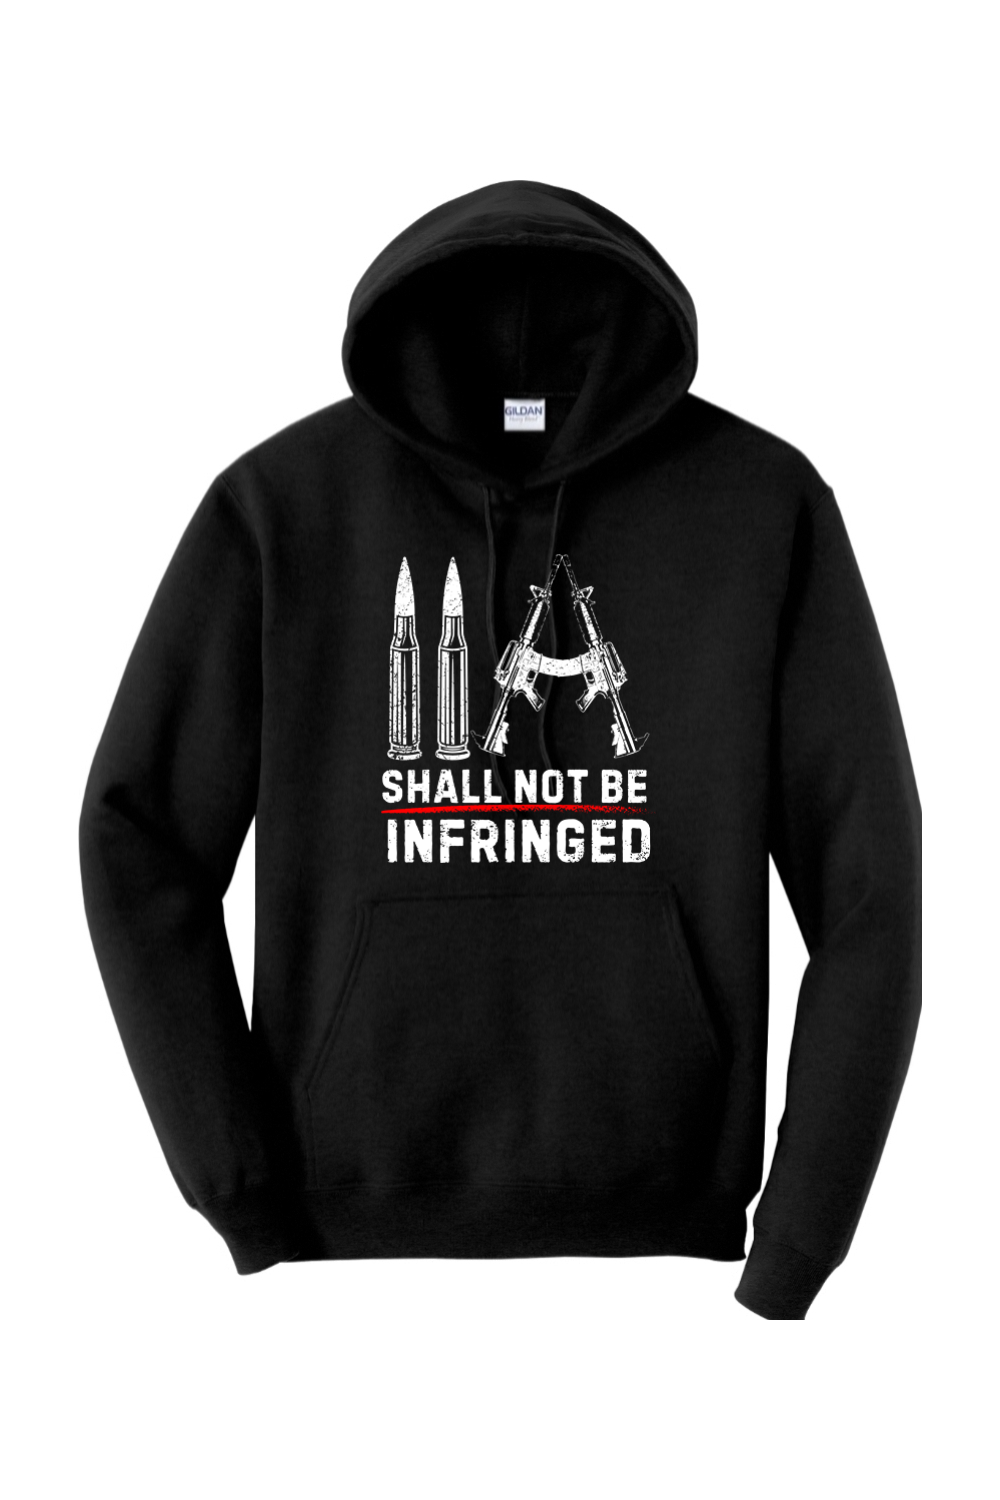 2A Shall Not Be Infringed Hoodie